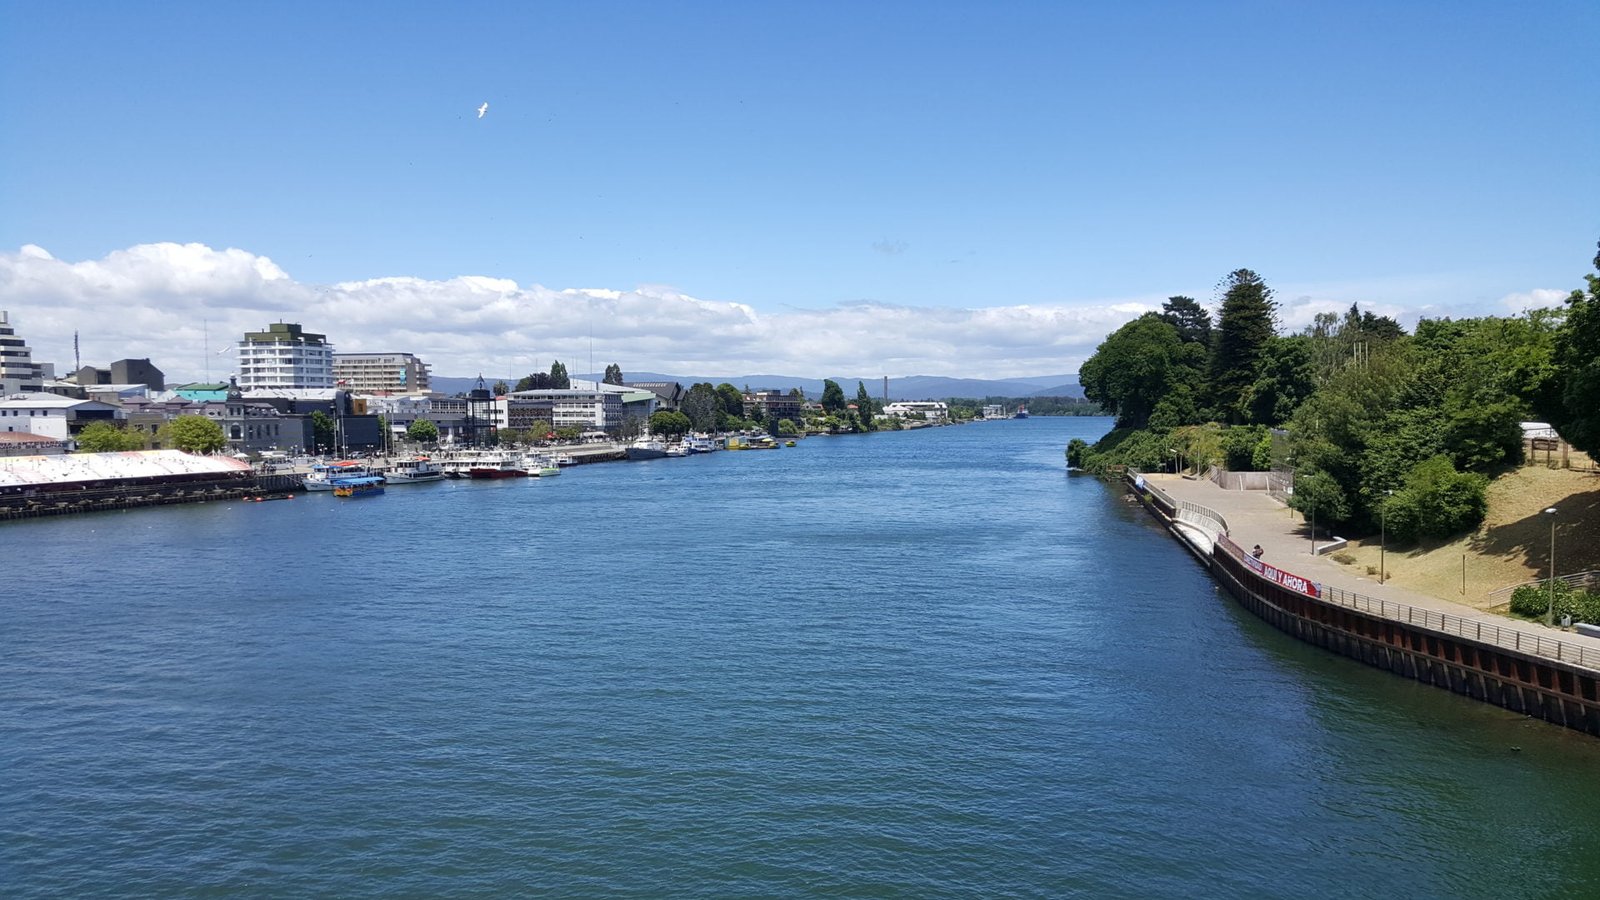 A beautiful view of Valdivia from the bridge to go to Isla Teja